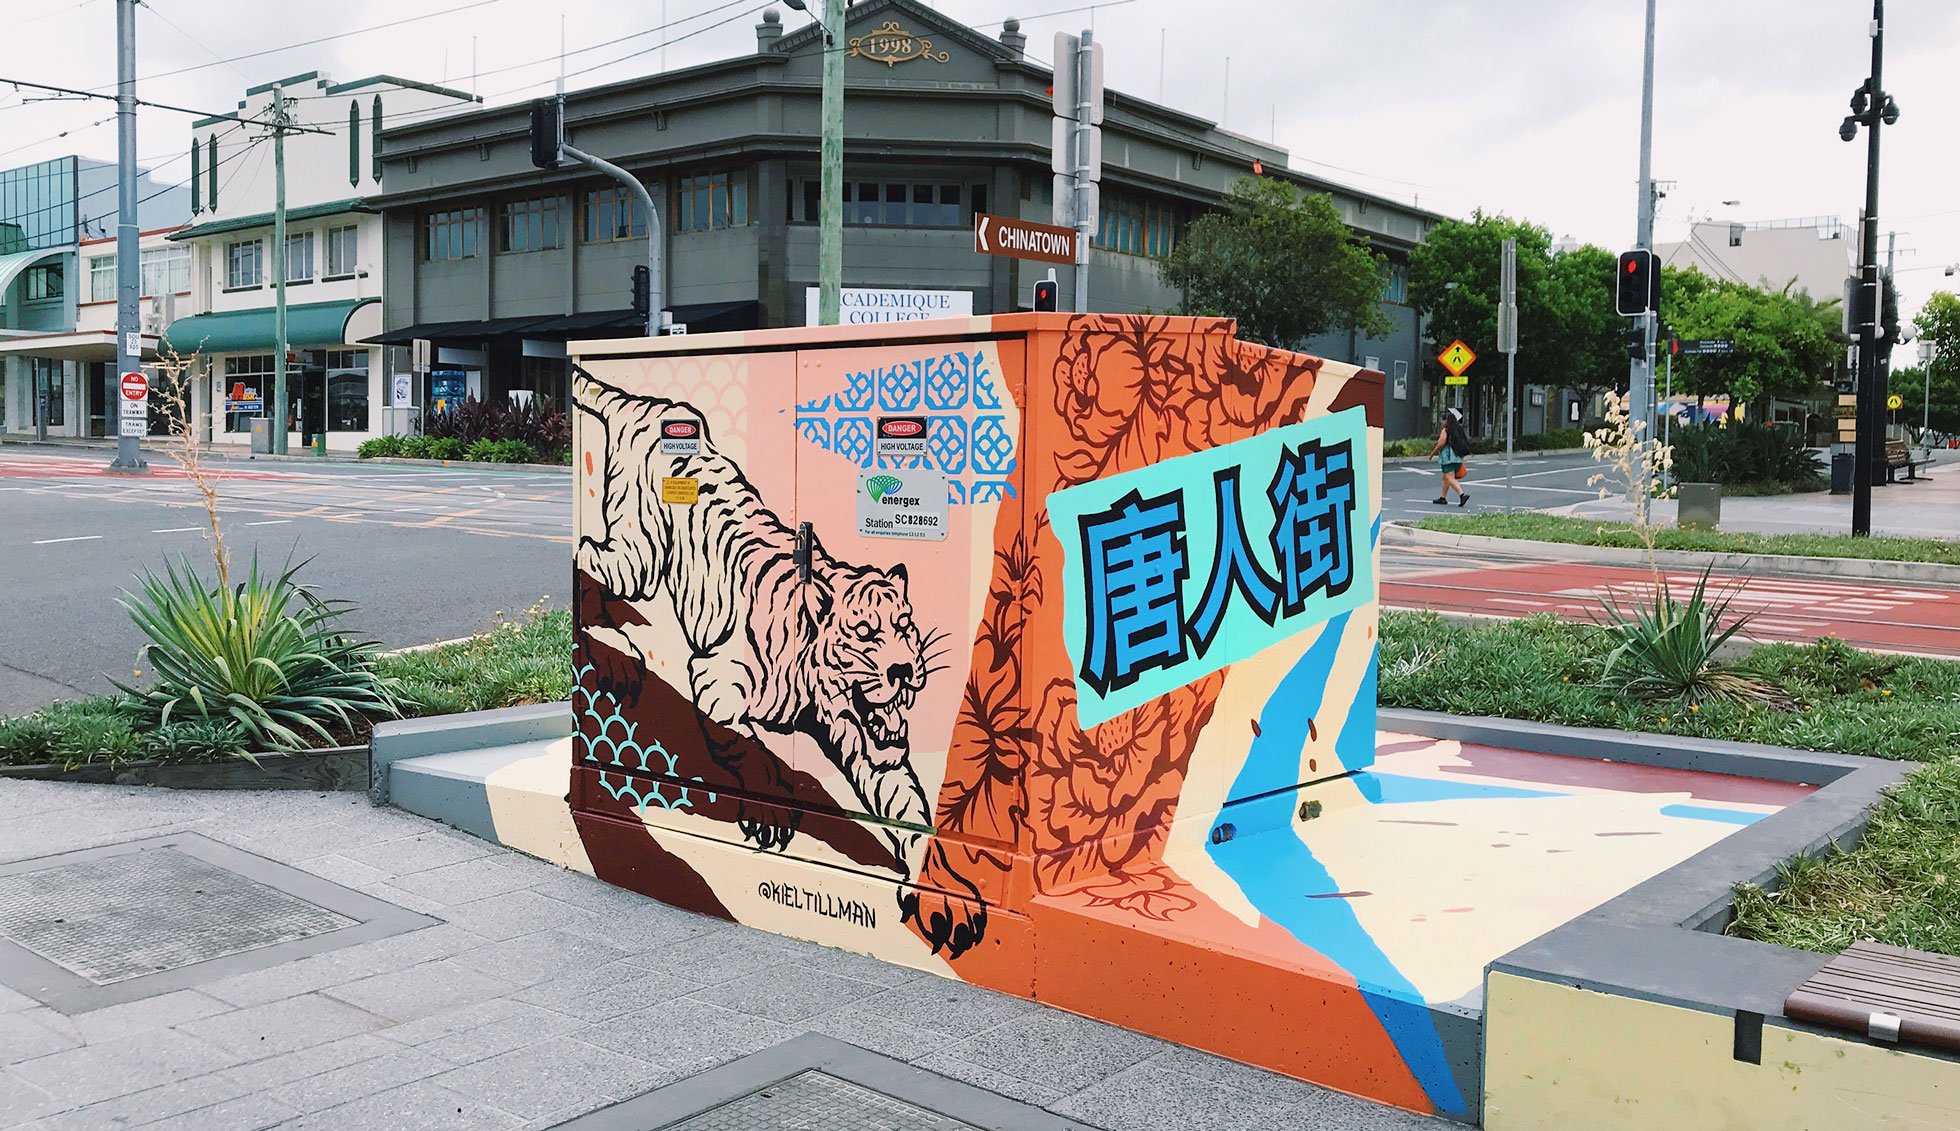 A public electrical box station covered in bright and colourful mural art relevant to the Chinatown era and culture. It features a tiger, Chinese glyphs and flower patterns. 